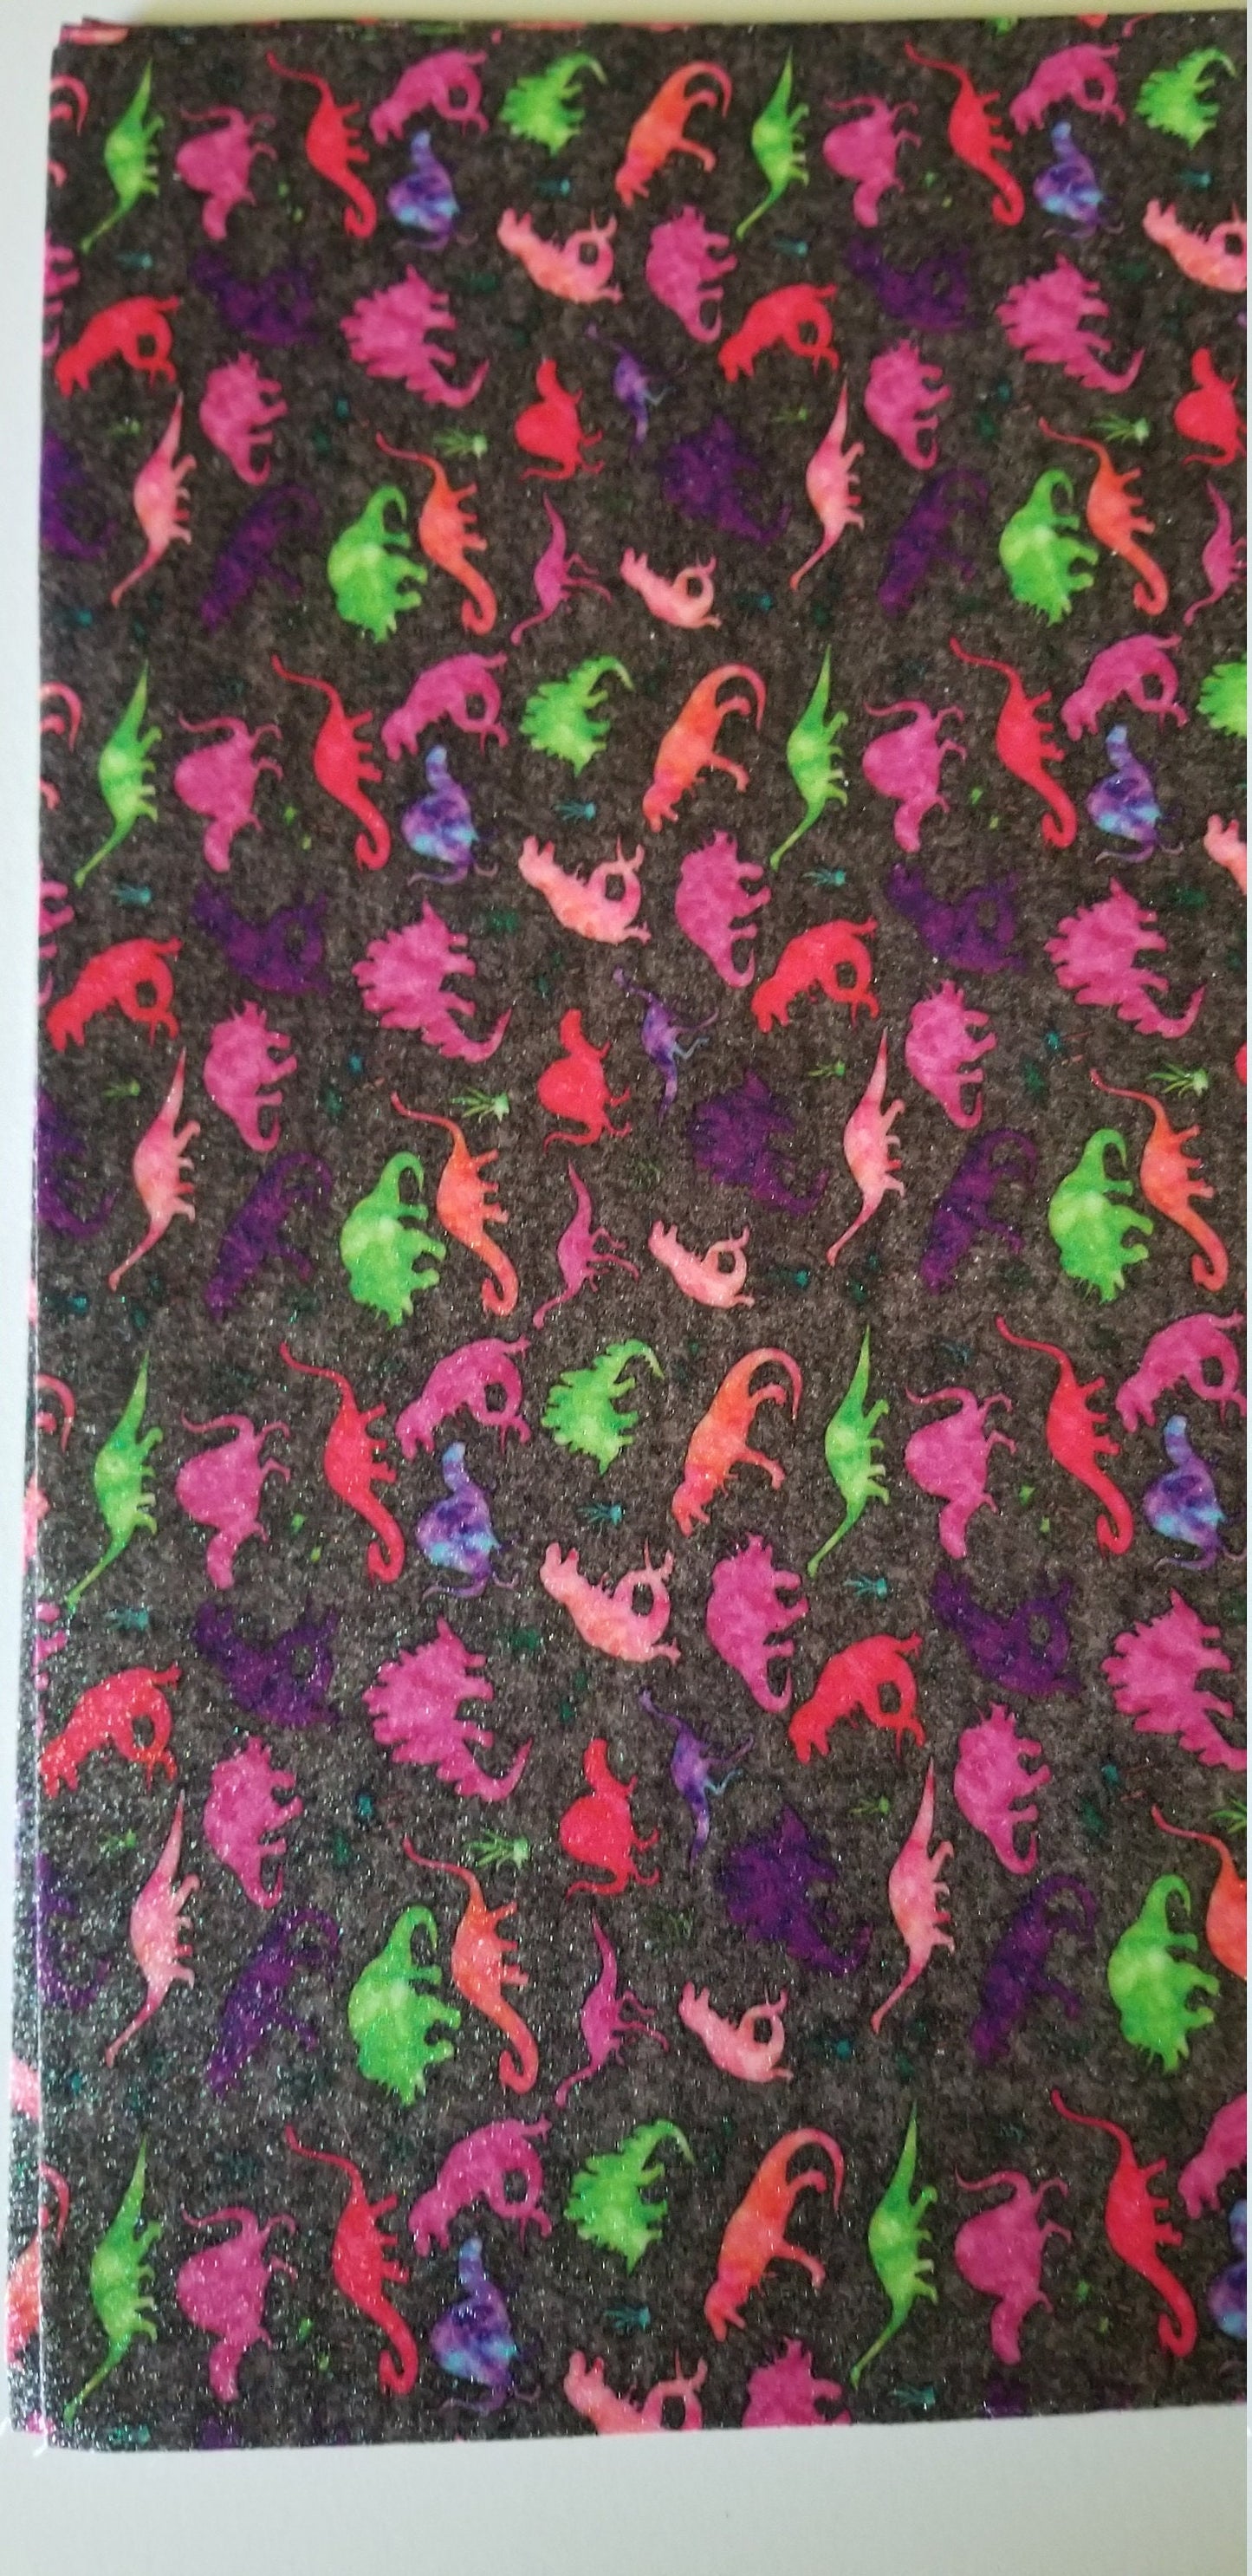 Shimmering multi-color Dinosaur faux leather sheets great for bows and earrings TheFabricDude